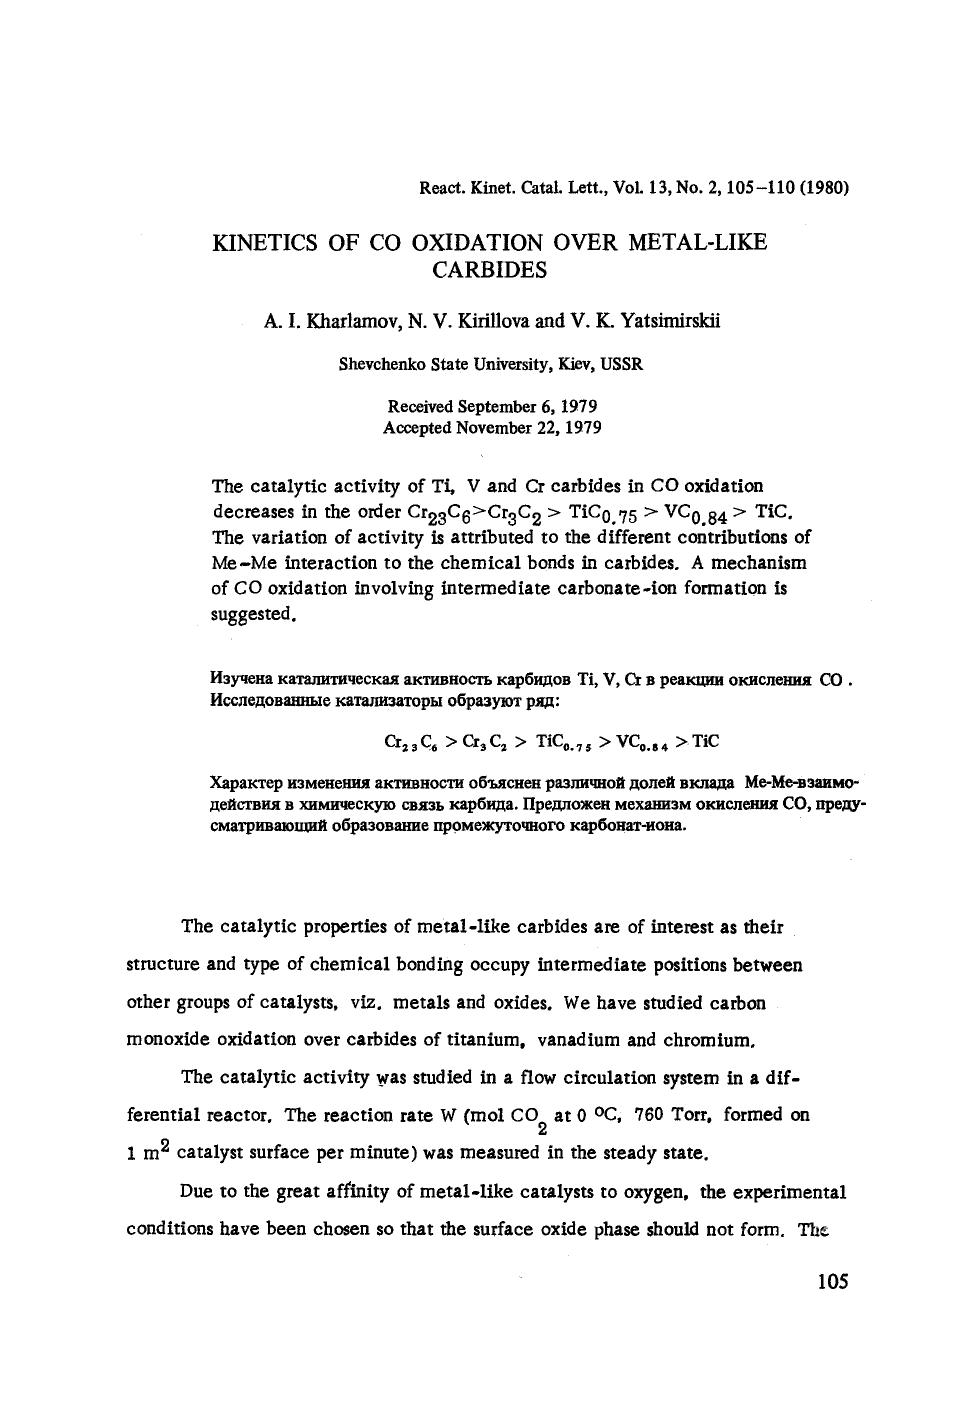 Kinetics of CO oxidation over metal-like carbides by Unknown